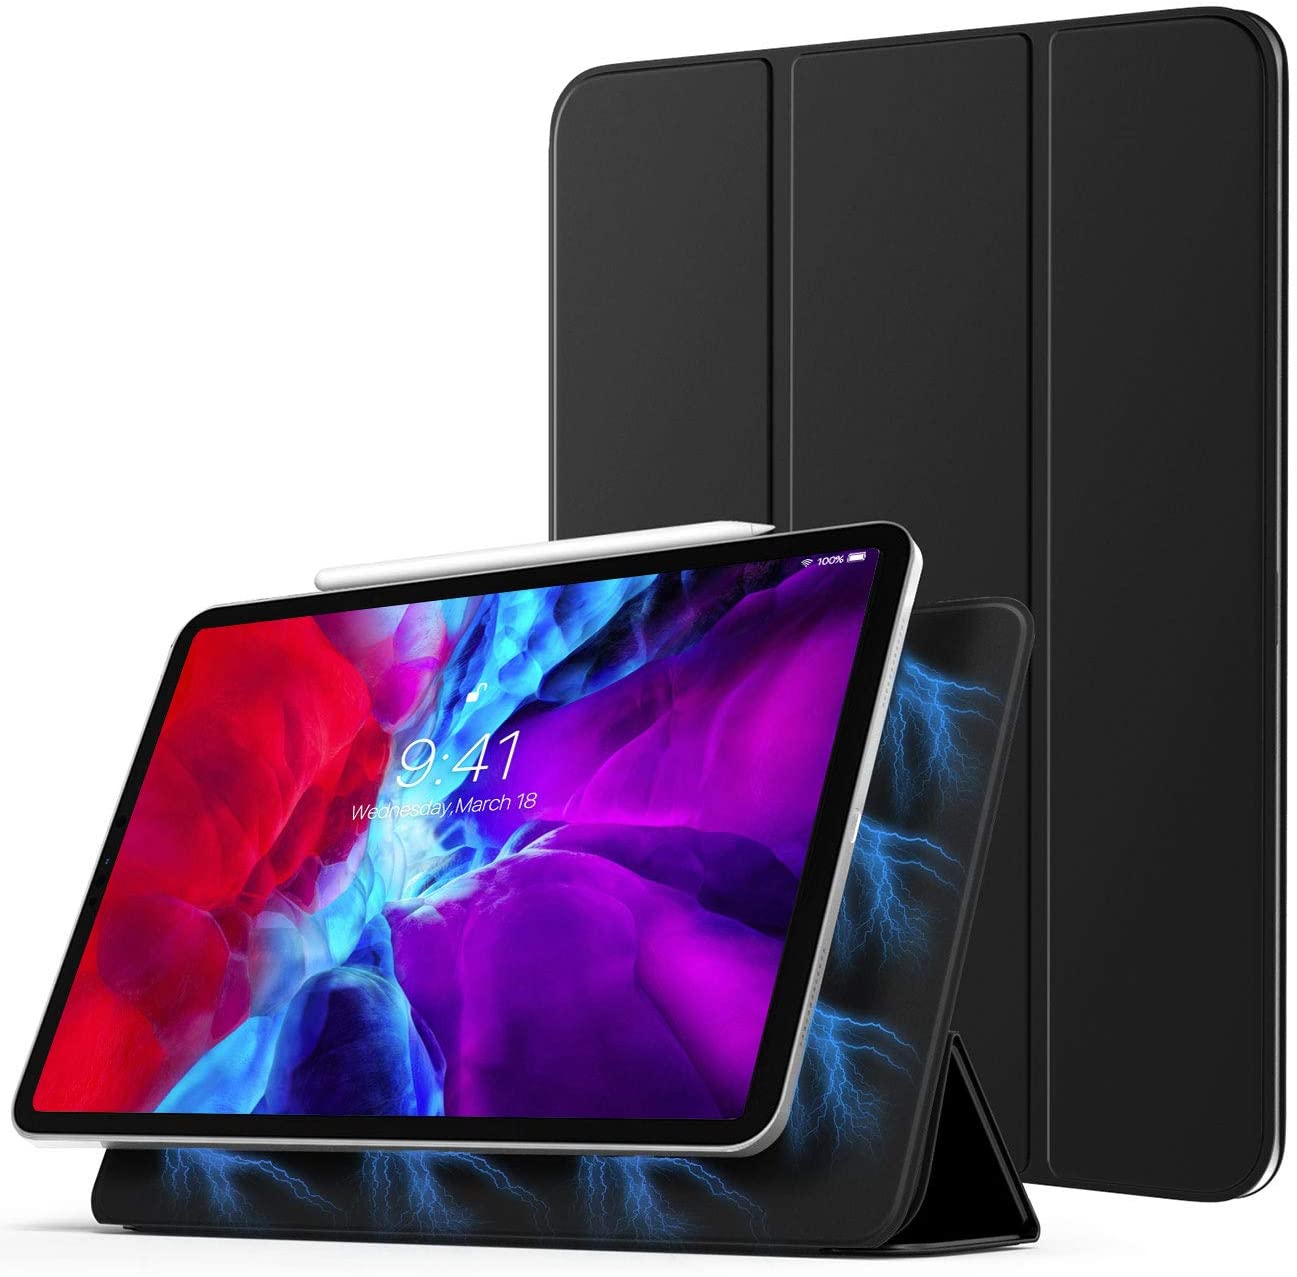 TiMOVO Case for New iPad Pro 12.9 Inch 2020 (4th Generation), Strong Magnetic Trifold Stand Case Cover with Auto Sleep/Wake Fit iPad Pro 12.9" 2020 Release - e4cents